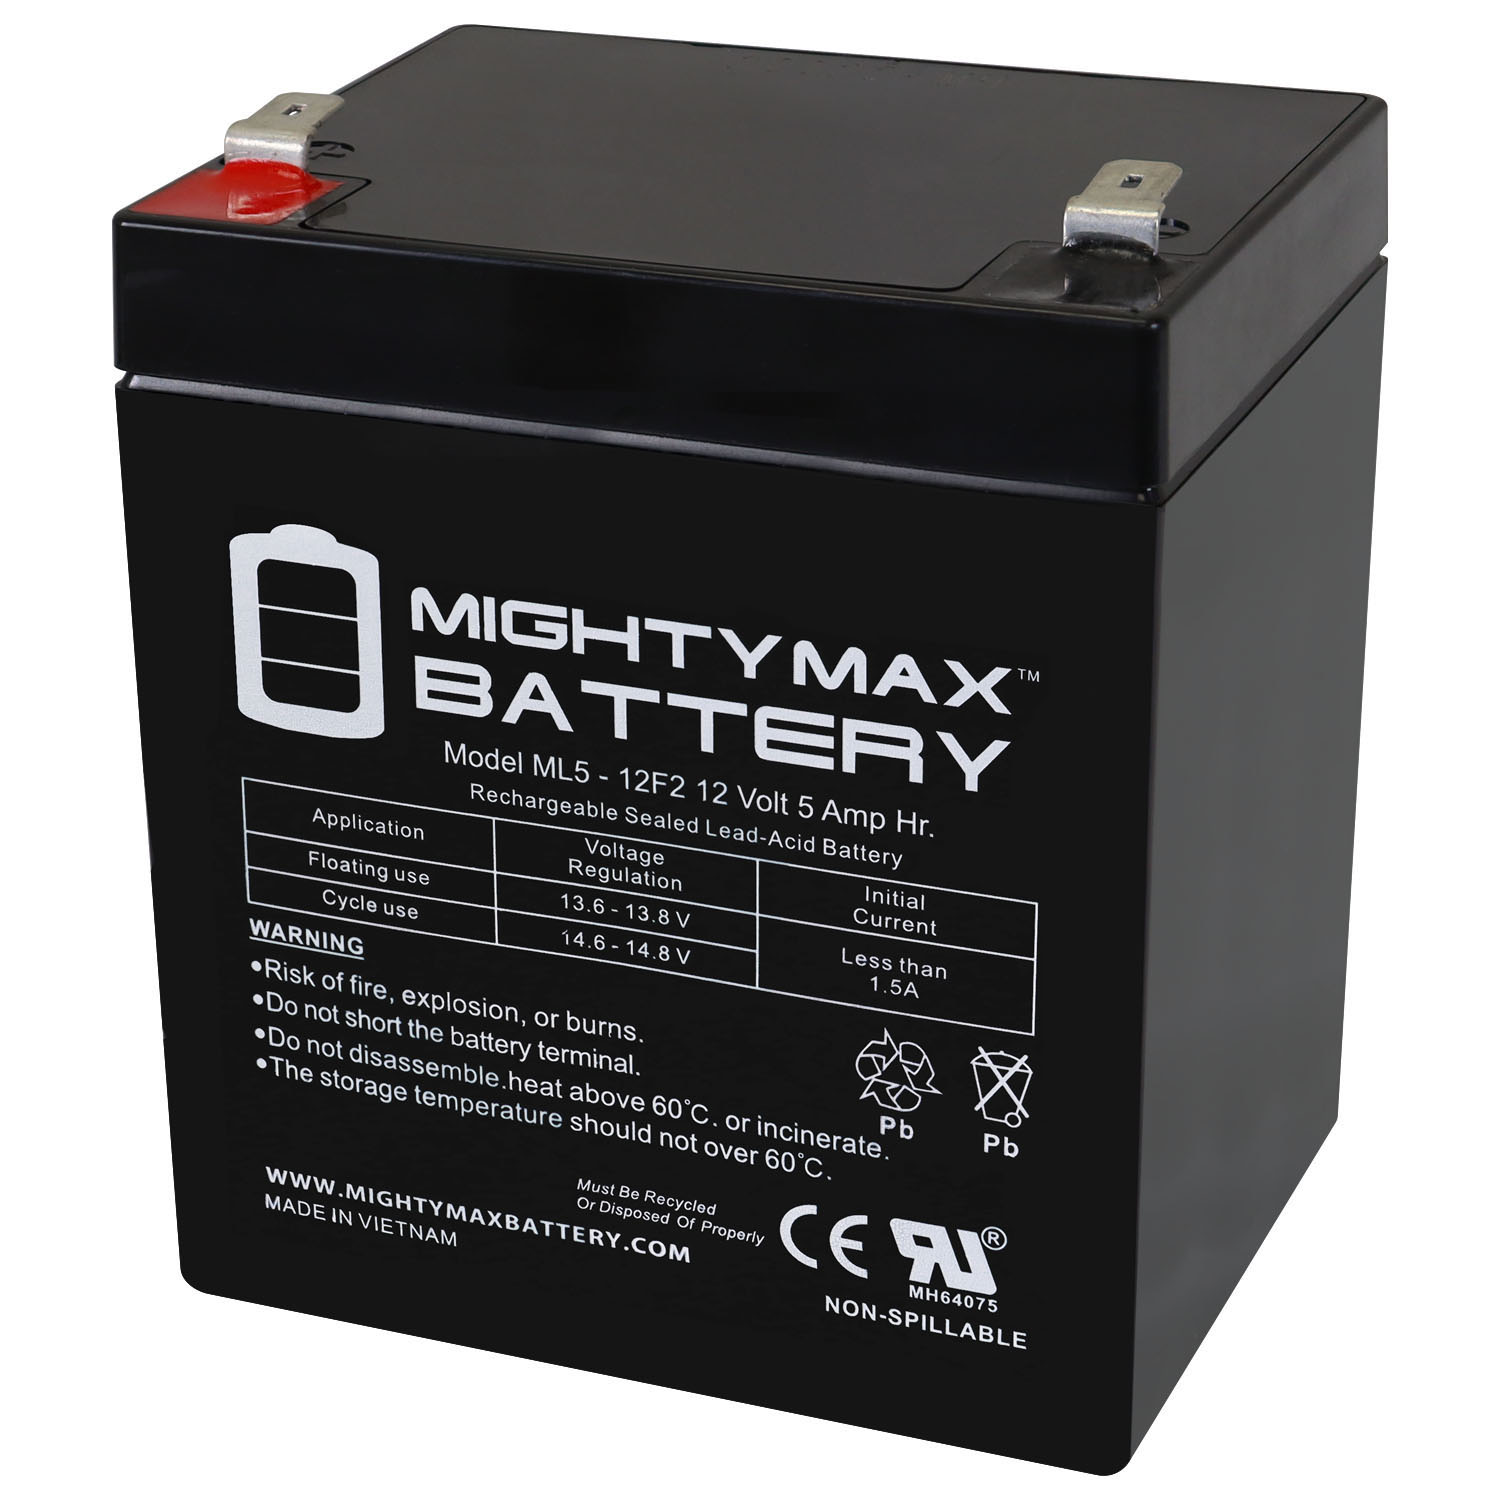 Mighty Max 12V 5Ah F2 SLA Replacement Battery for ElectricSc